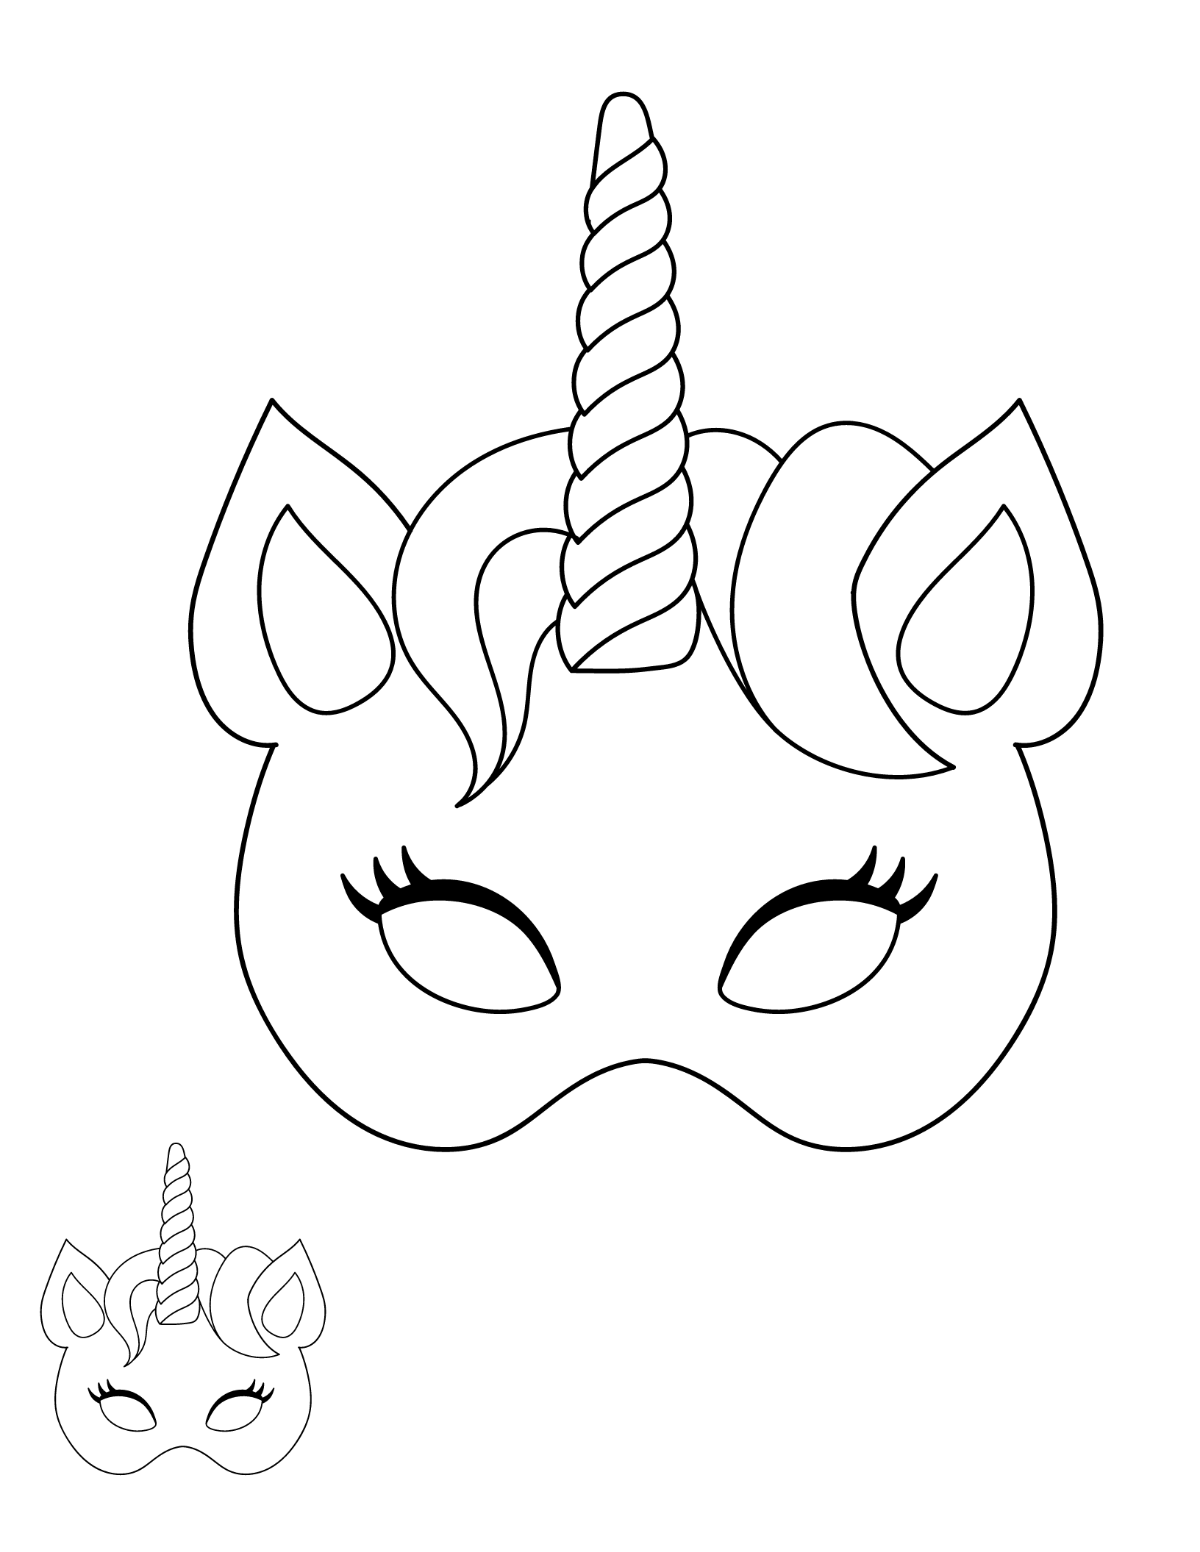 FREE Unicorn Coloring Page - Edit Online & Download | Template.net